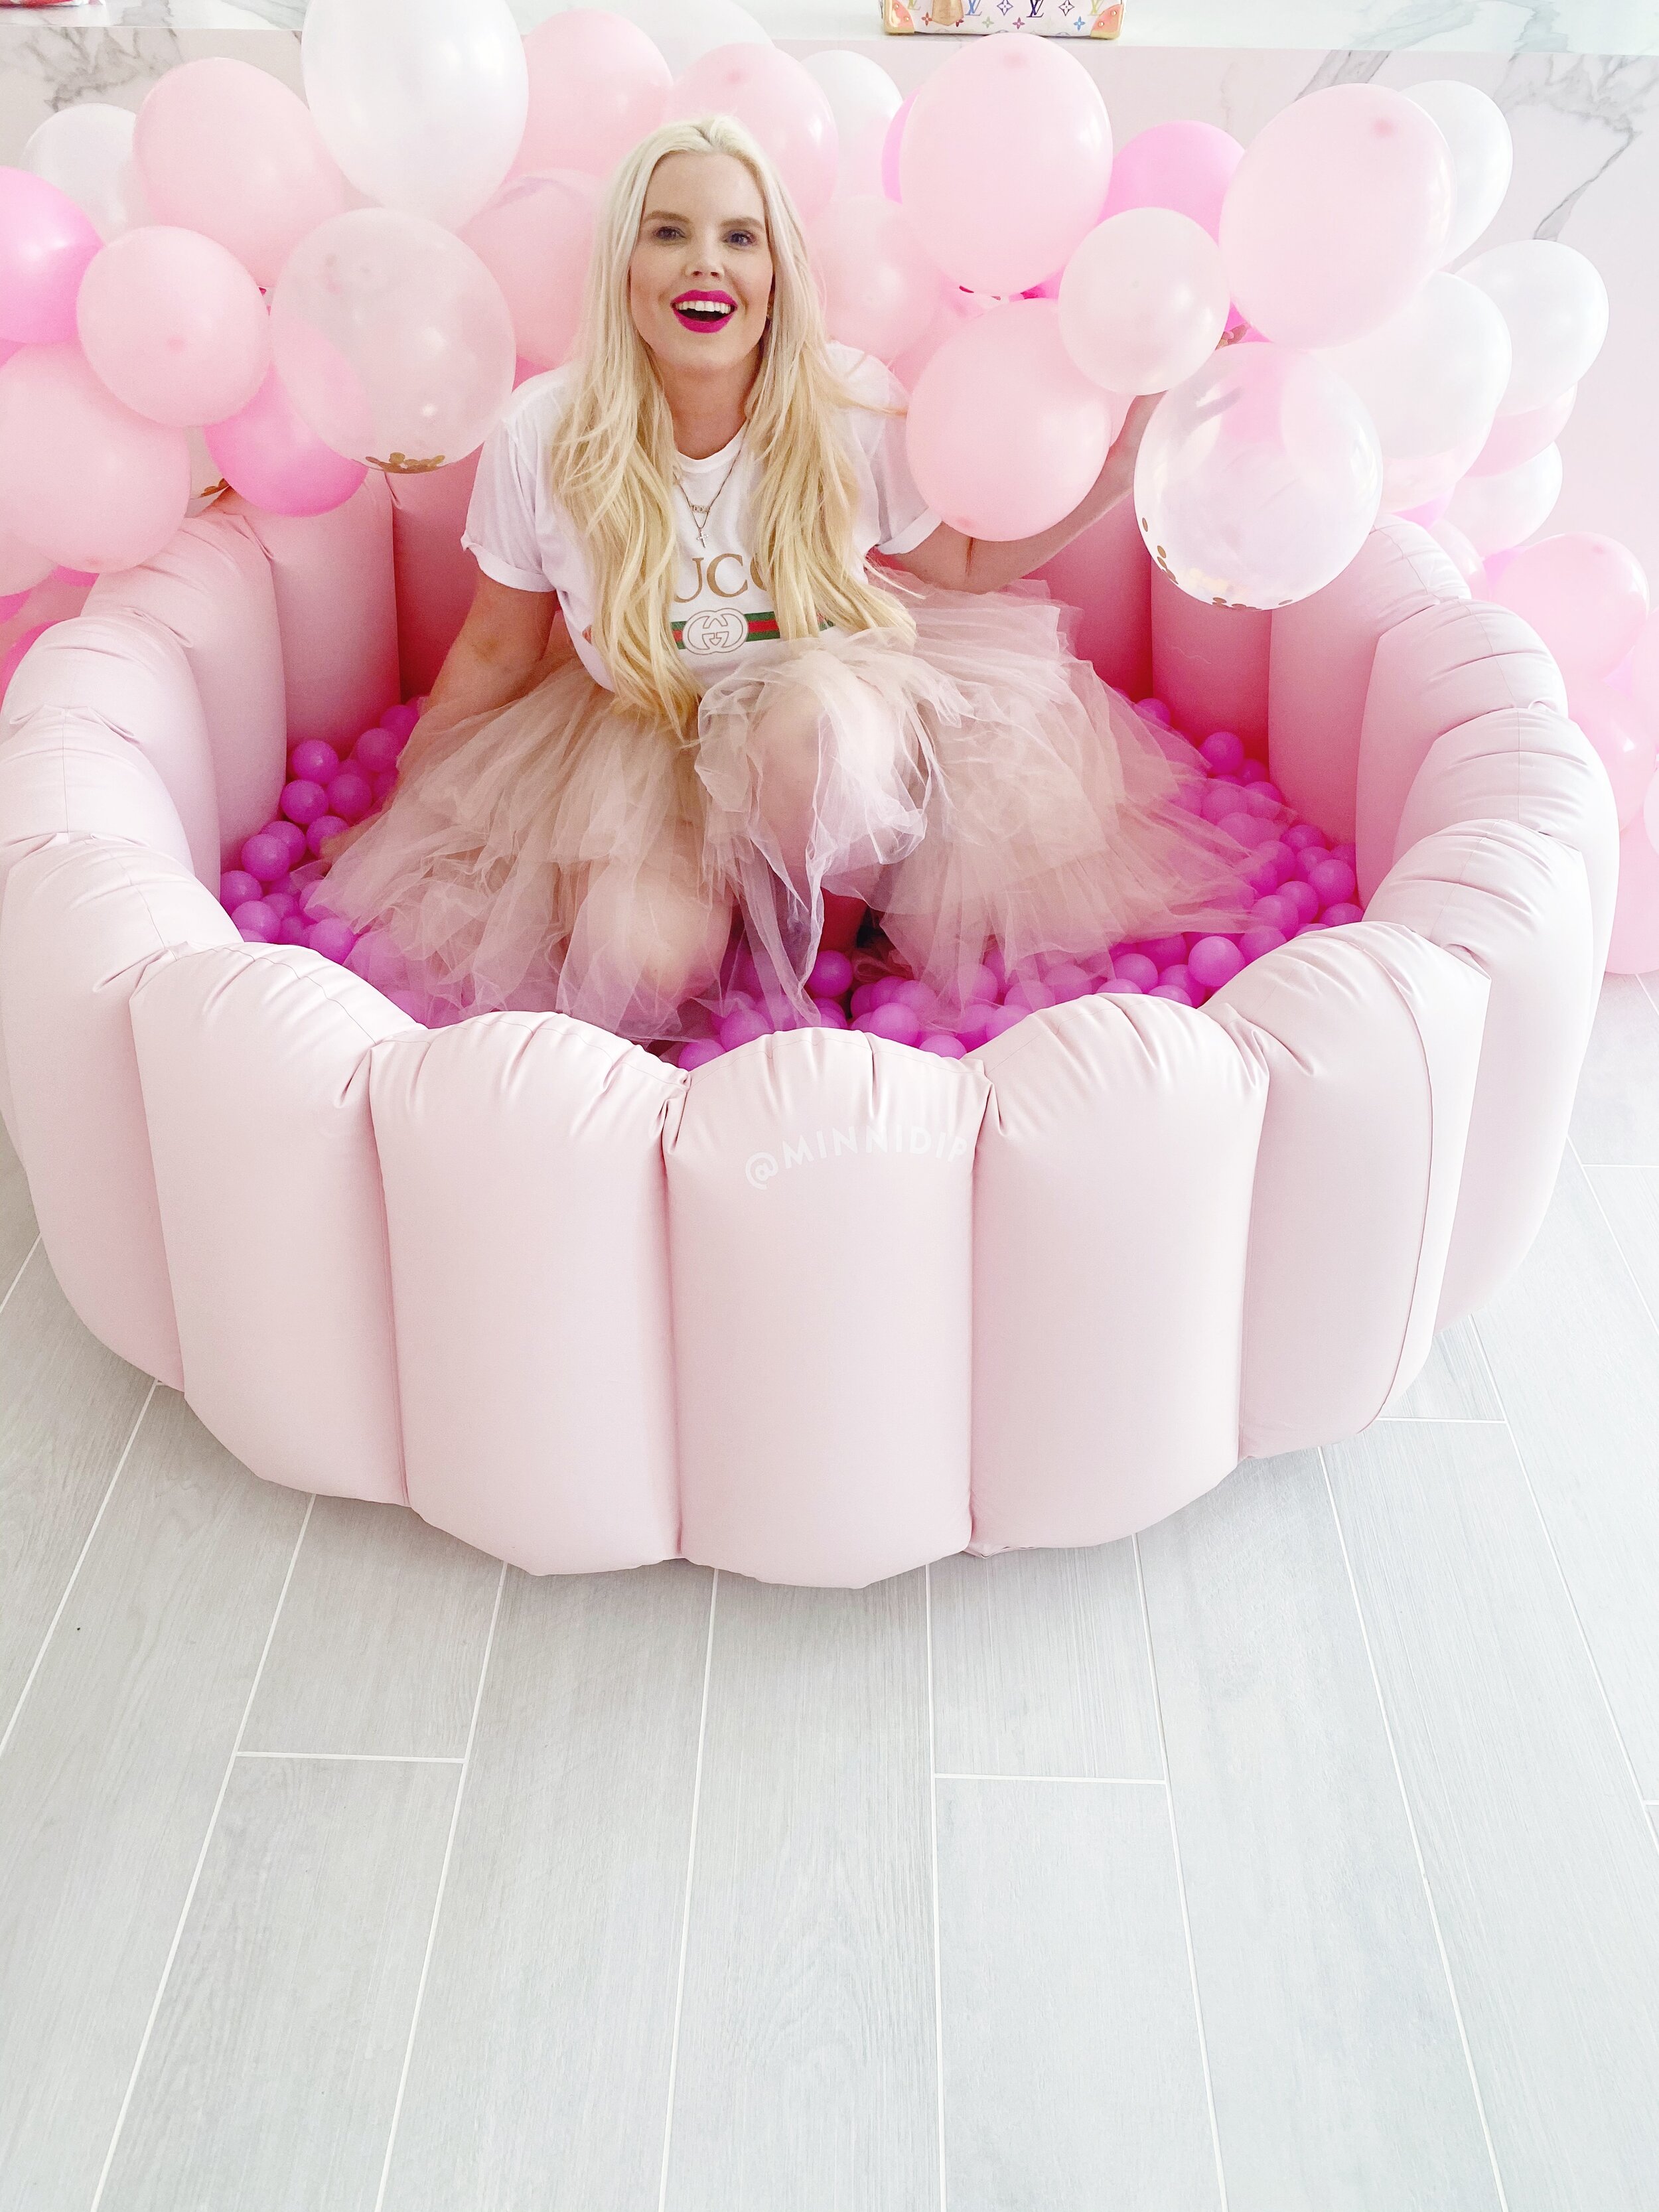 The-Caroline-Doll-Birthday-Pink-Ball-Pit-Minnidip-Inflatable-Pool-Luxury-Office-Goals-Party-Lifestyle-1.JPG